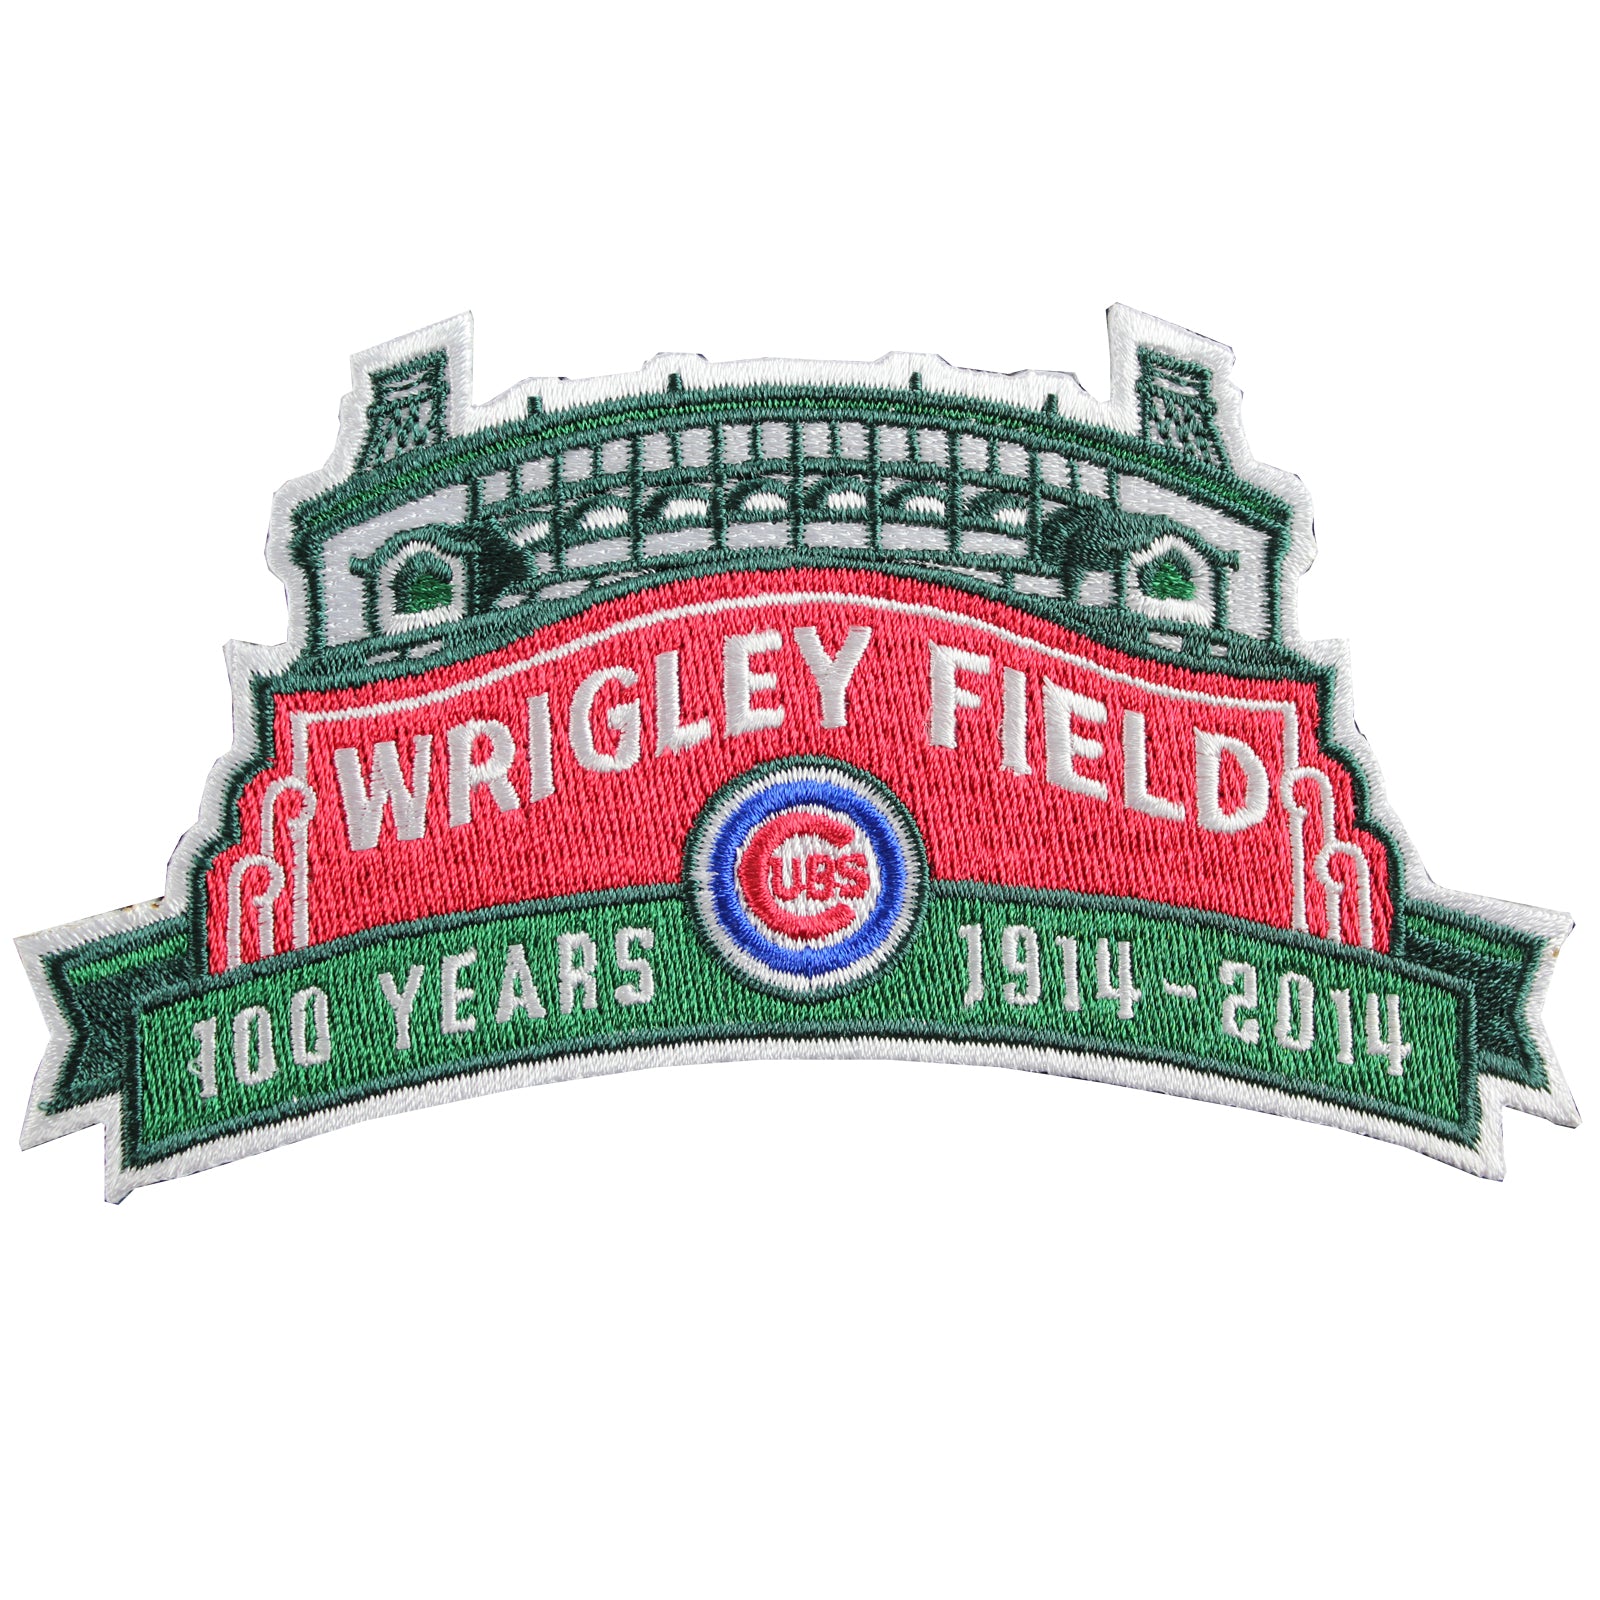 Chicago Cubs Feds 1914 Jersey Men's SGA Wrigley Field 100th Anniversary